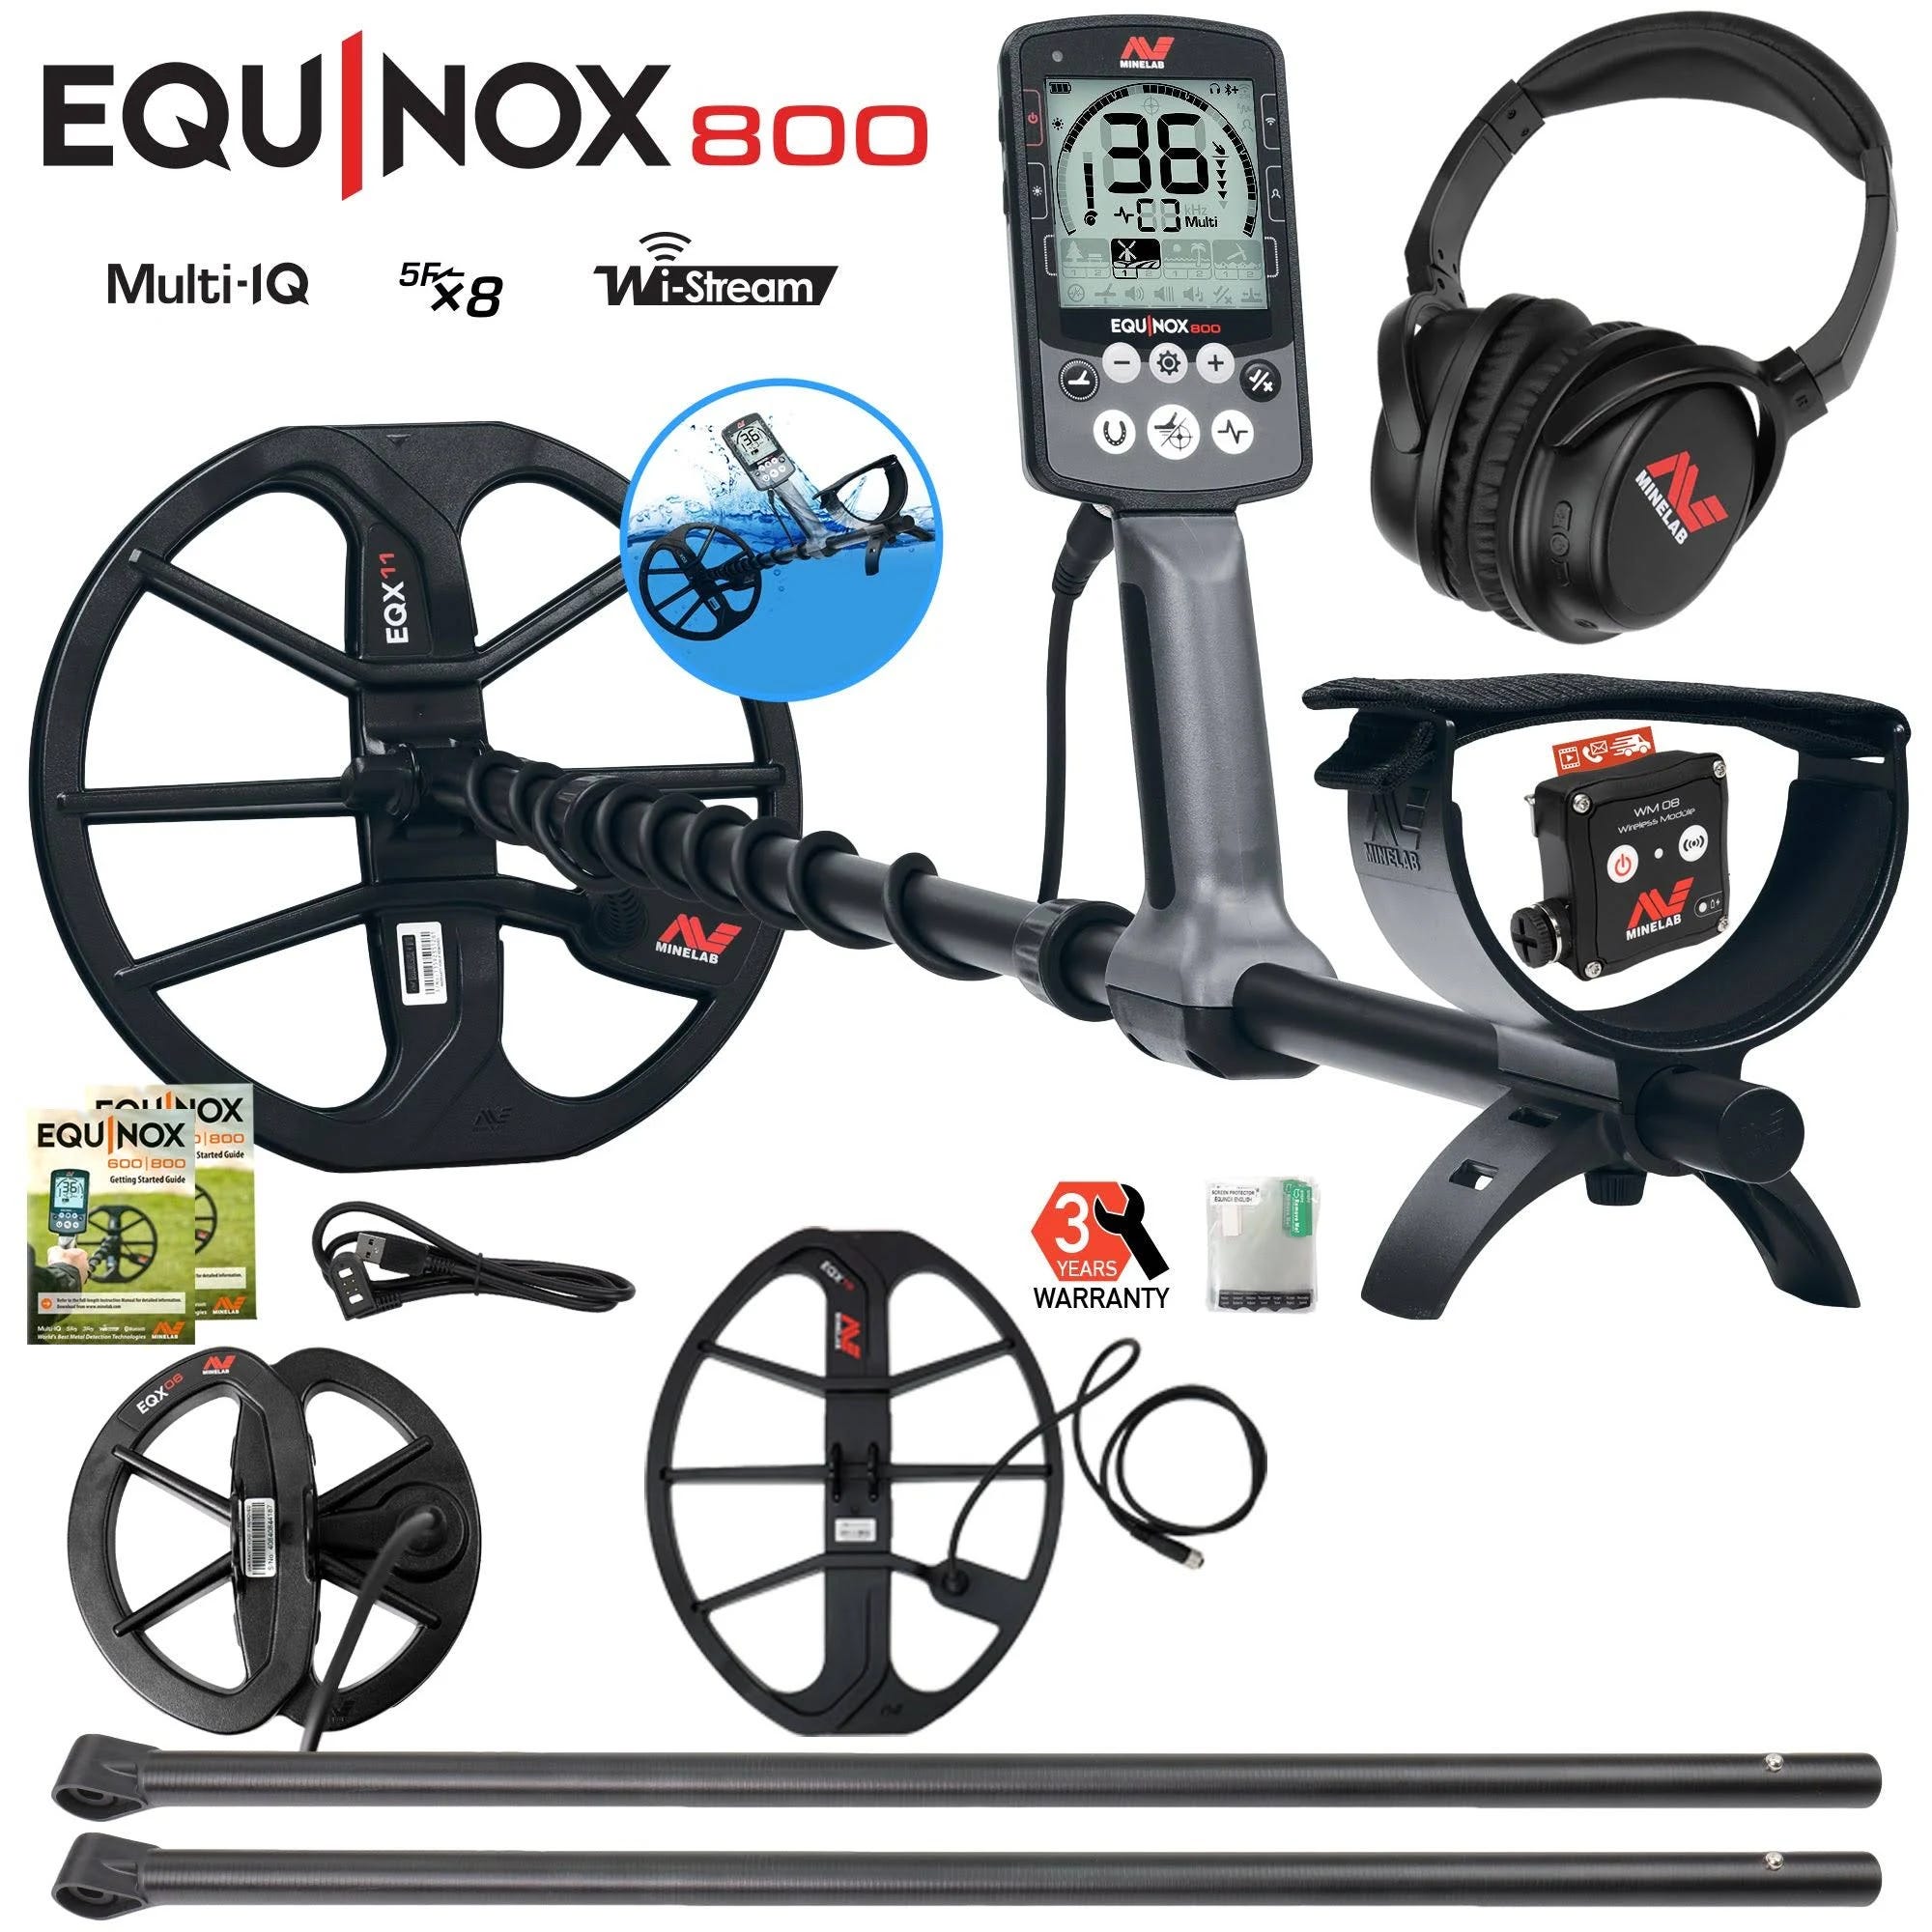 Minelab Equinox 800 Metal Detector with Dual Coil System and Lower Shafts | Image